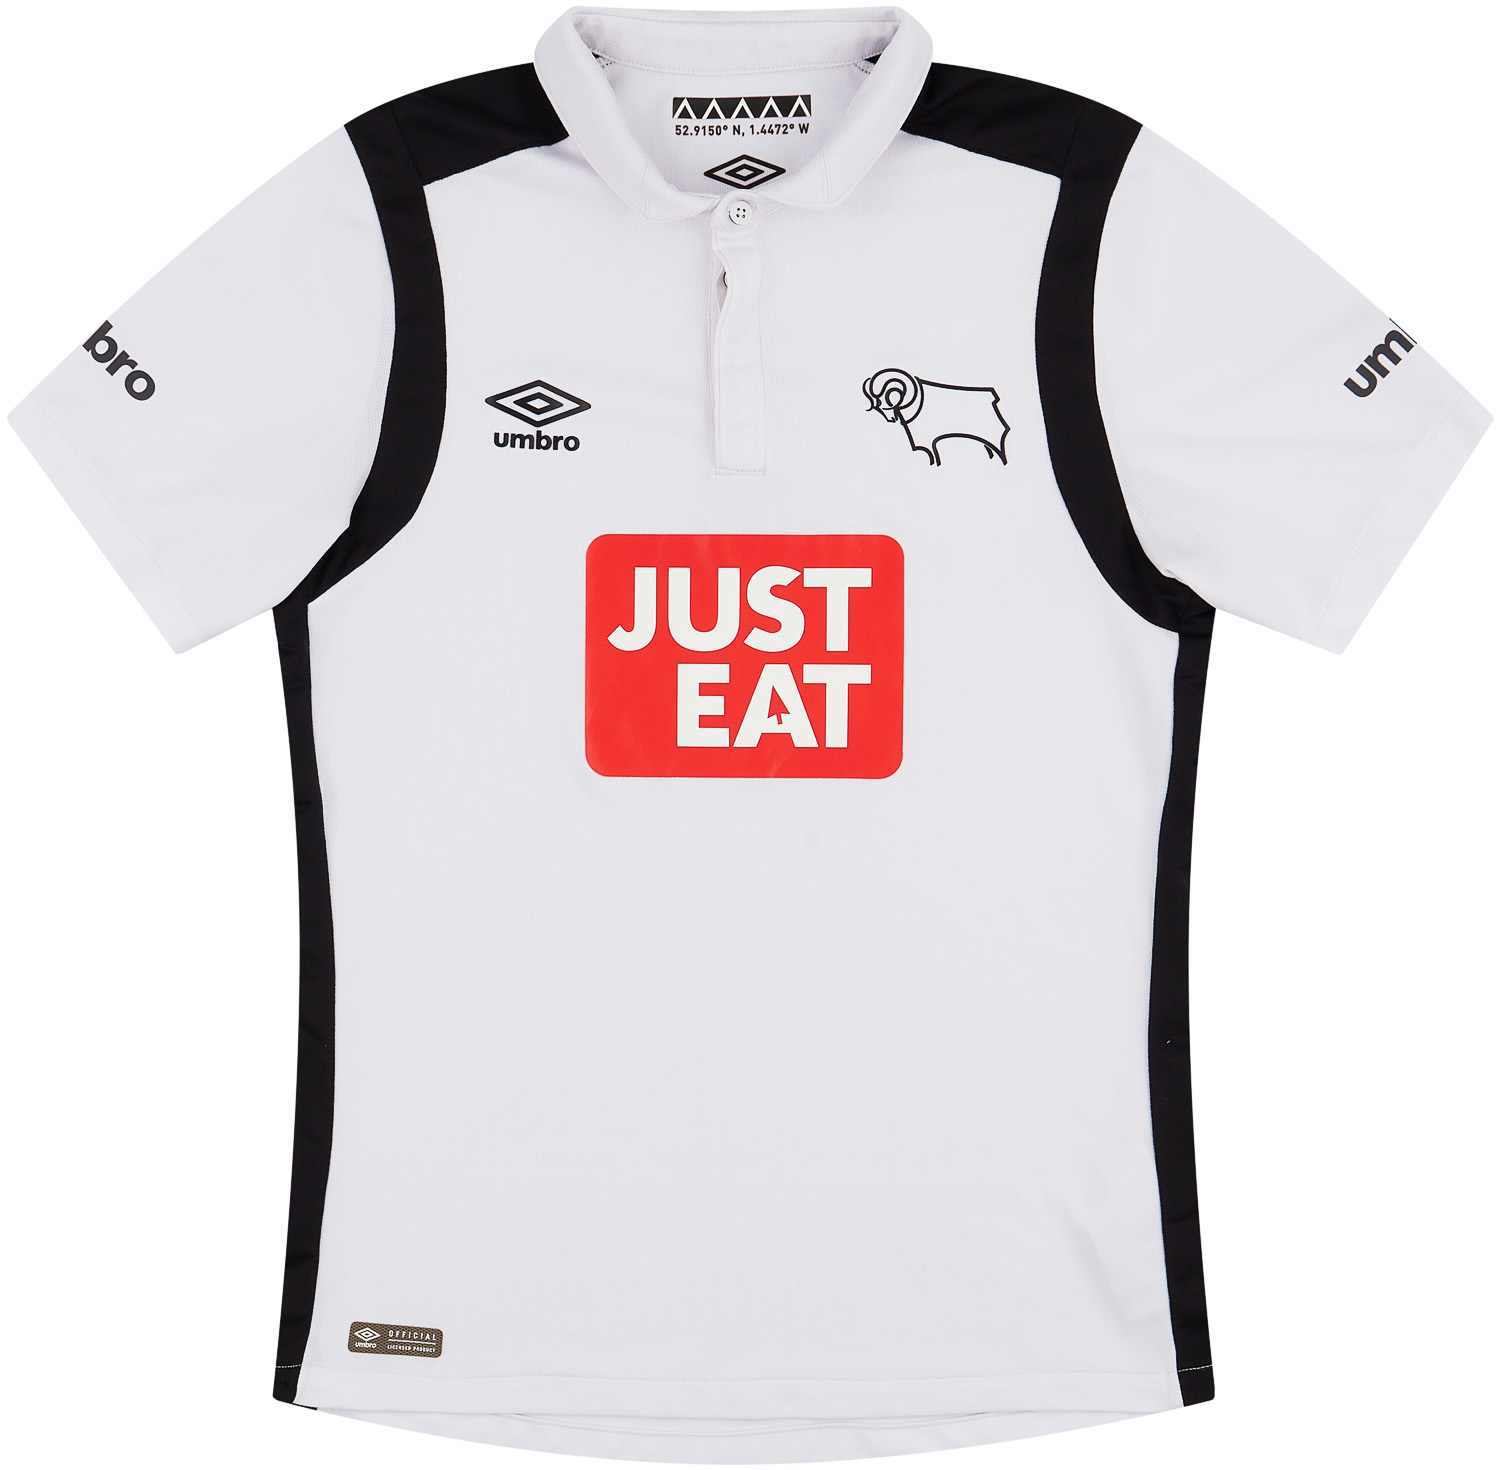 2016-17 Derby County Home Shirt - 8/10 - ()